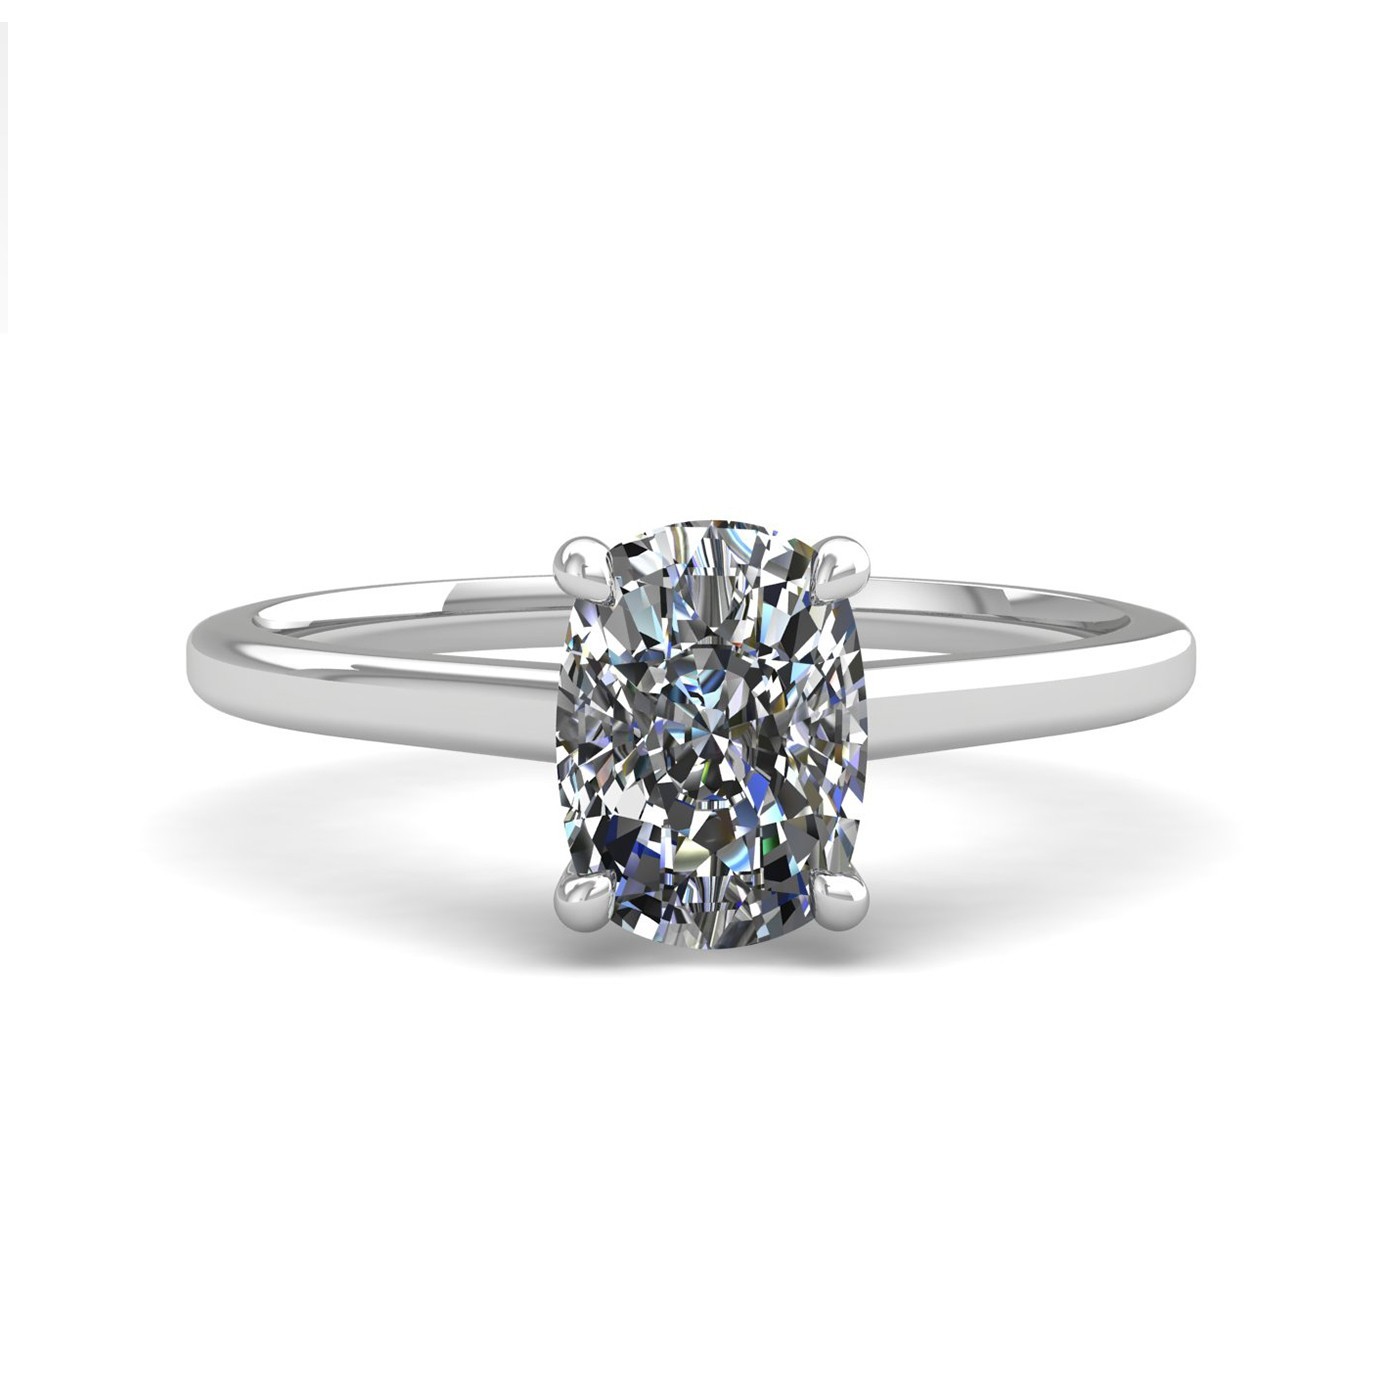 18k white gold 1,20 ct 4 prongs solitaire elongated cushion cut diamond engagement ring with whisper thin band